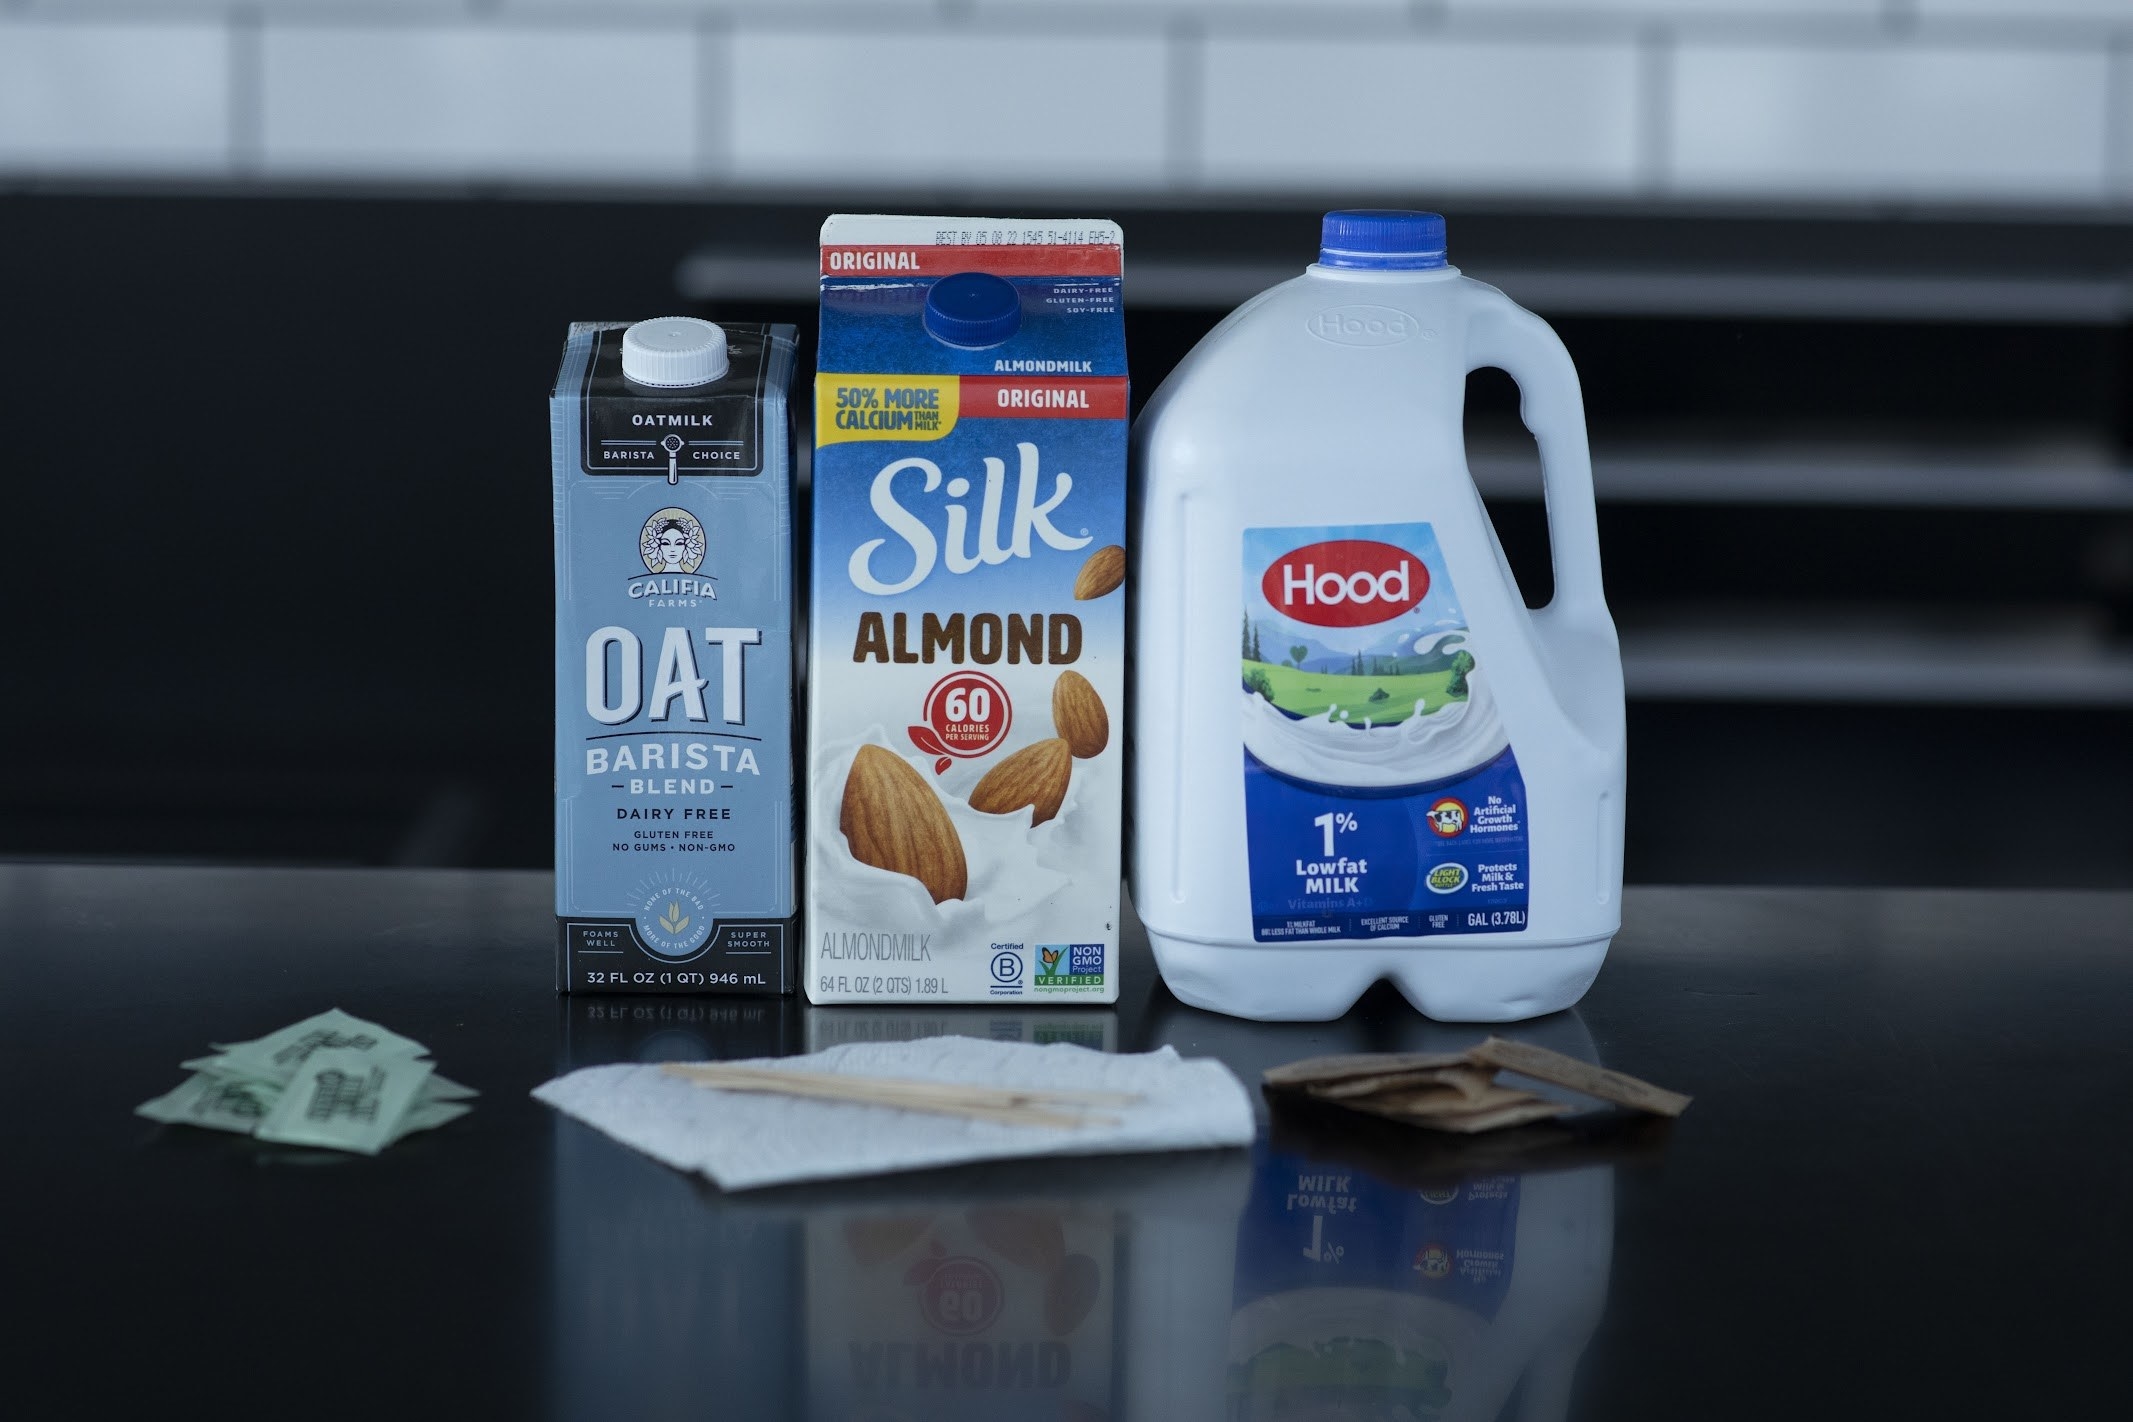 Cartons of oat milk and almond milk, a jug of 1% low-fat milk, and packages of other milk substitutes